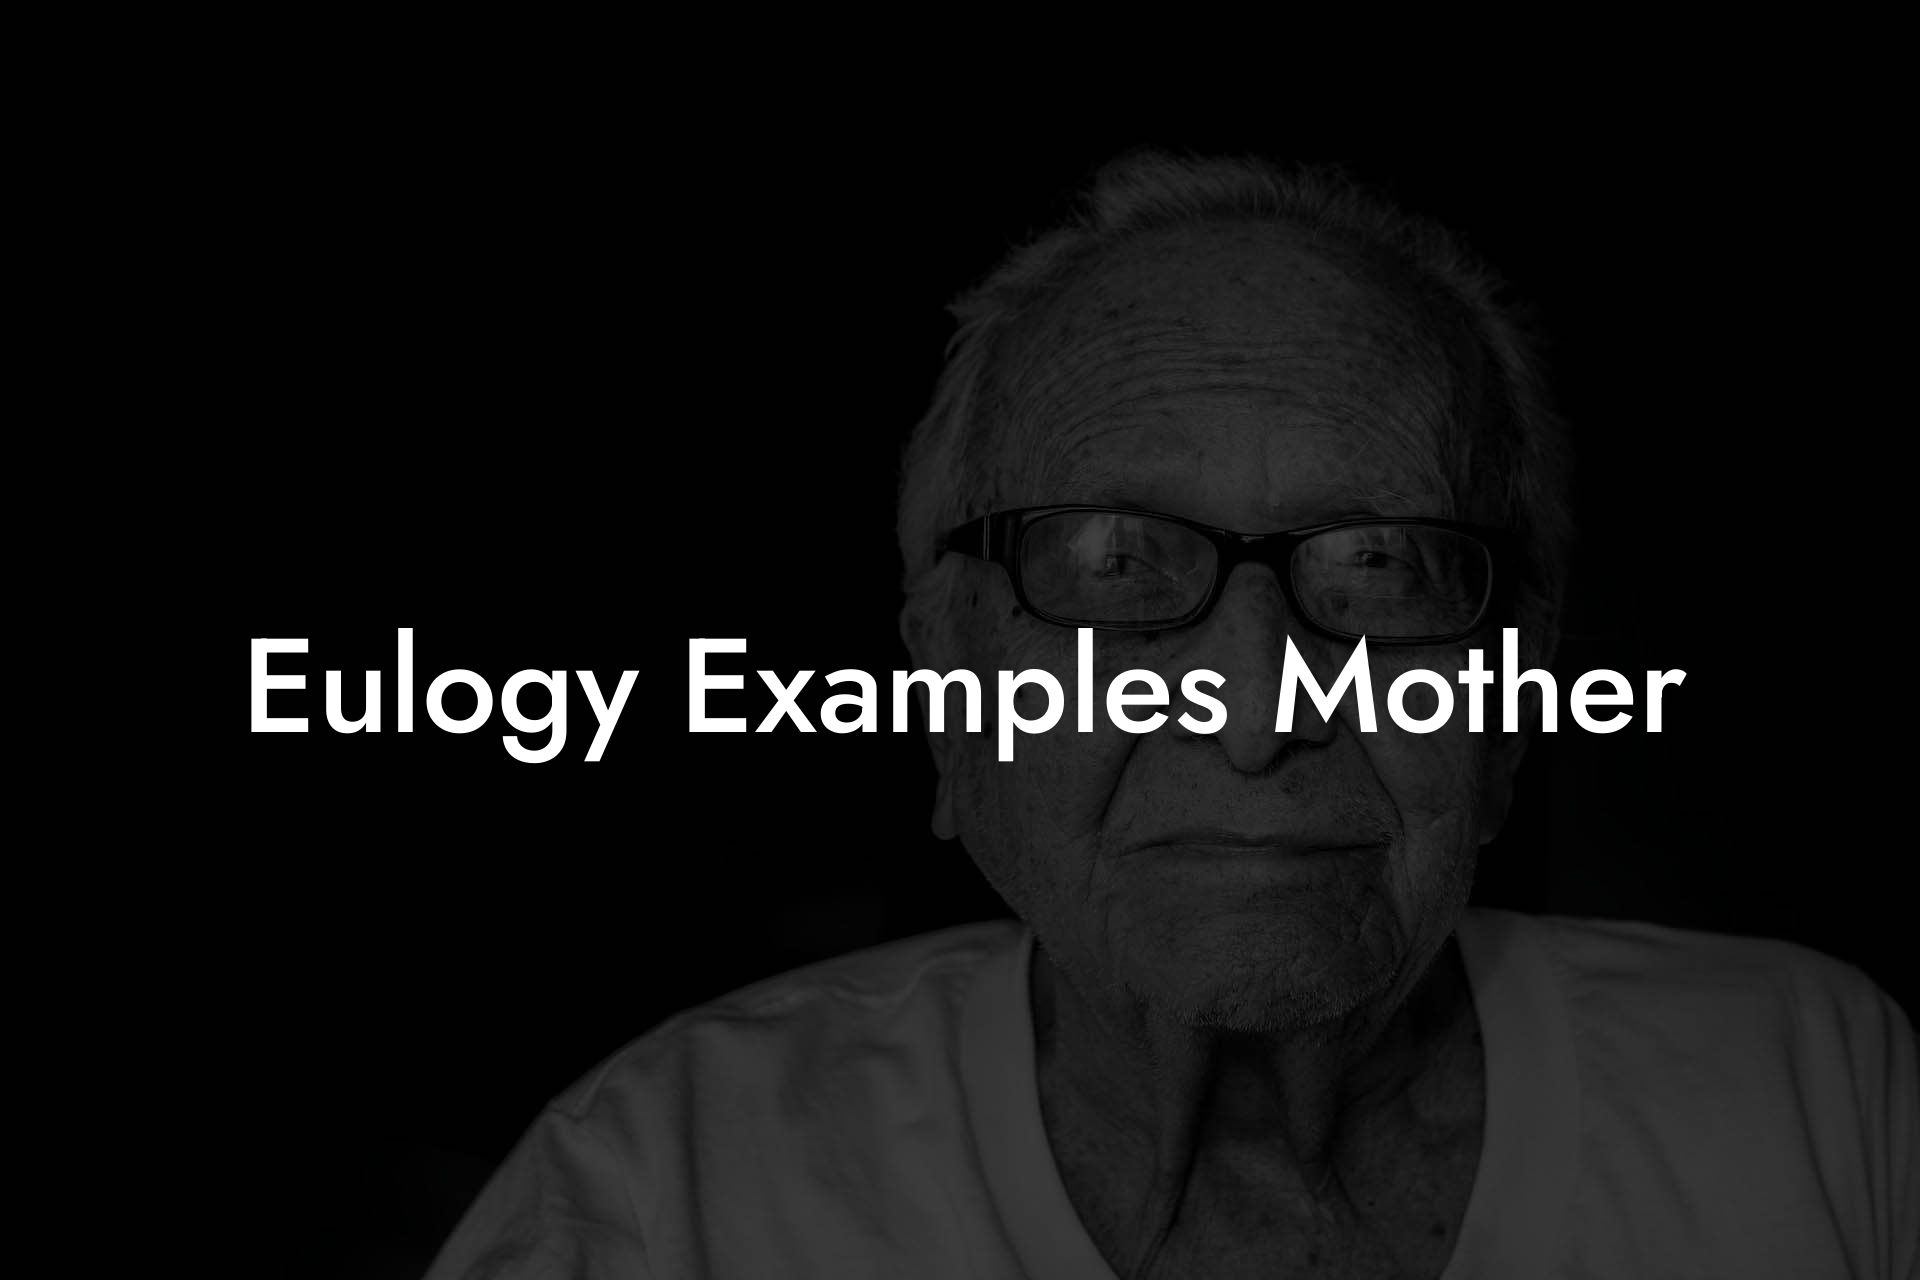 Eulogy Examples Mother